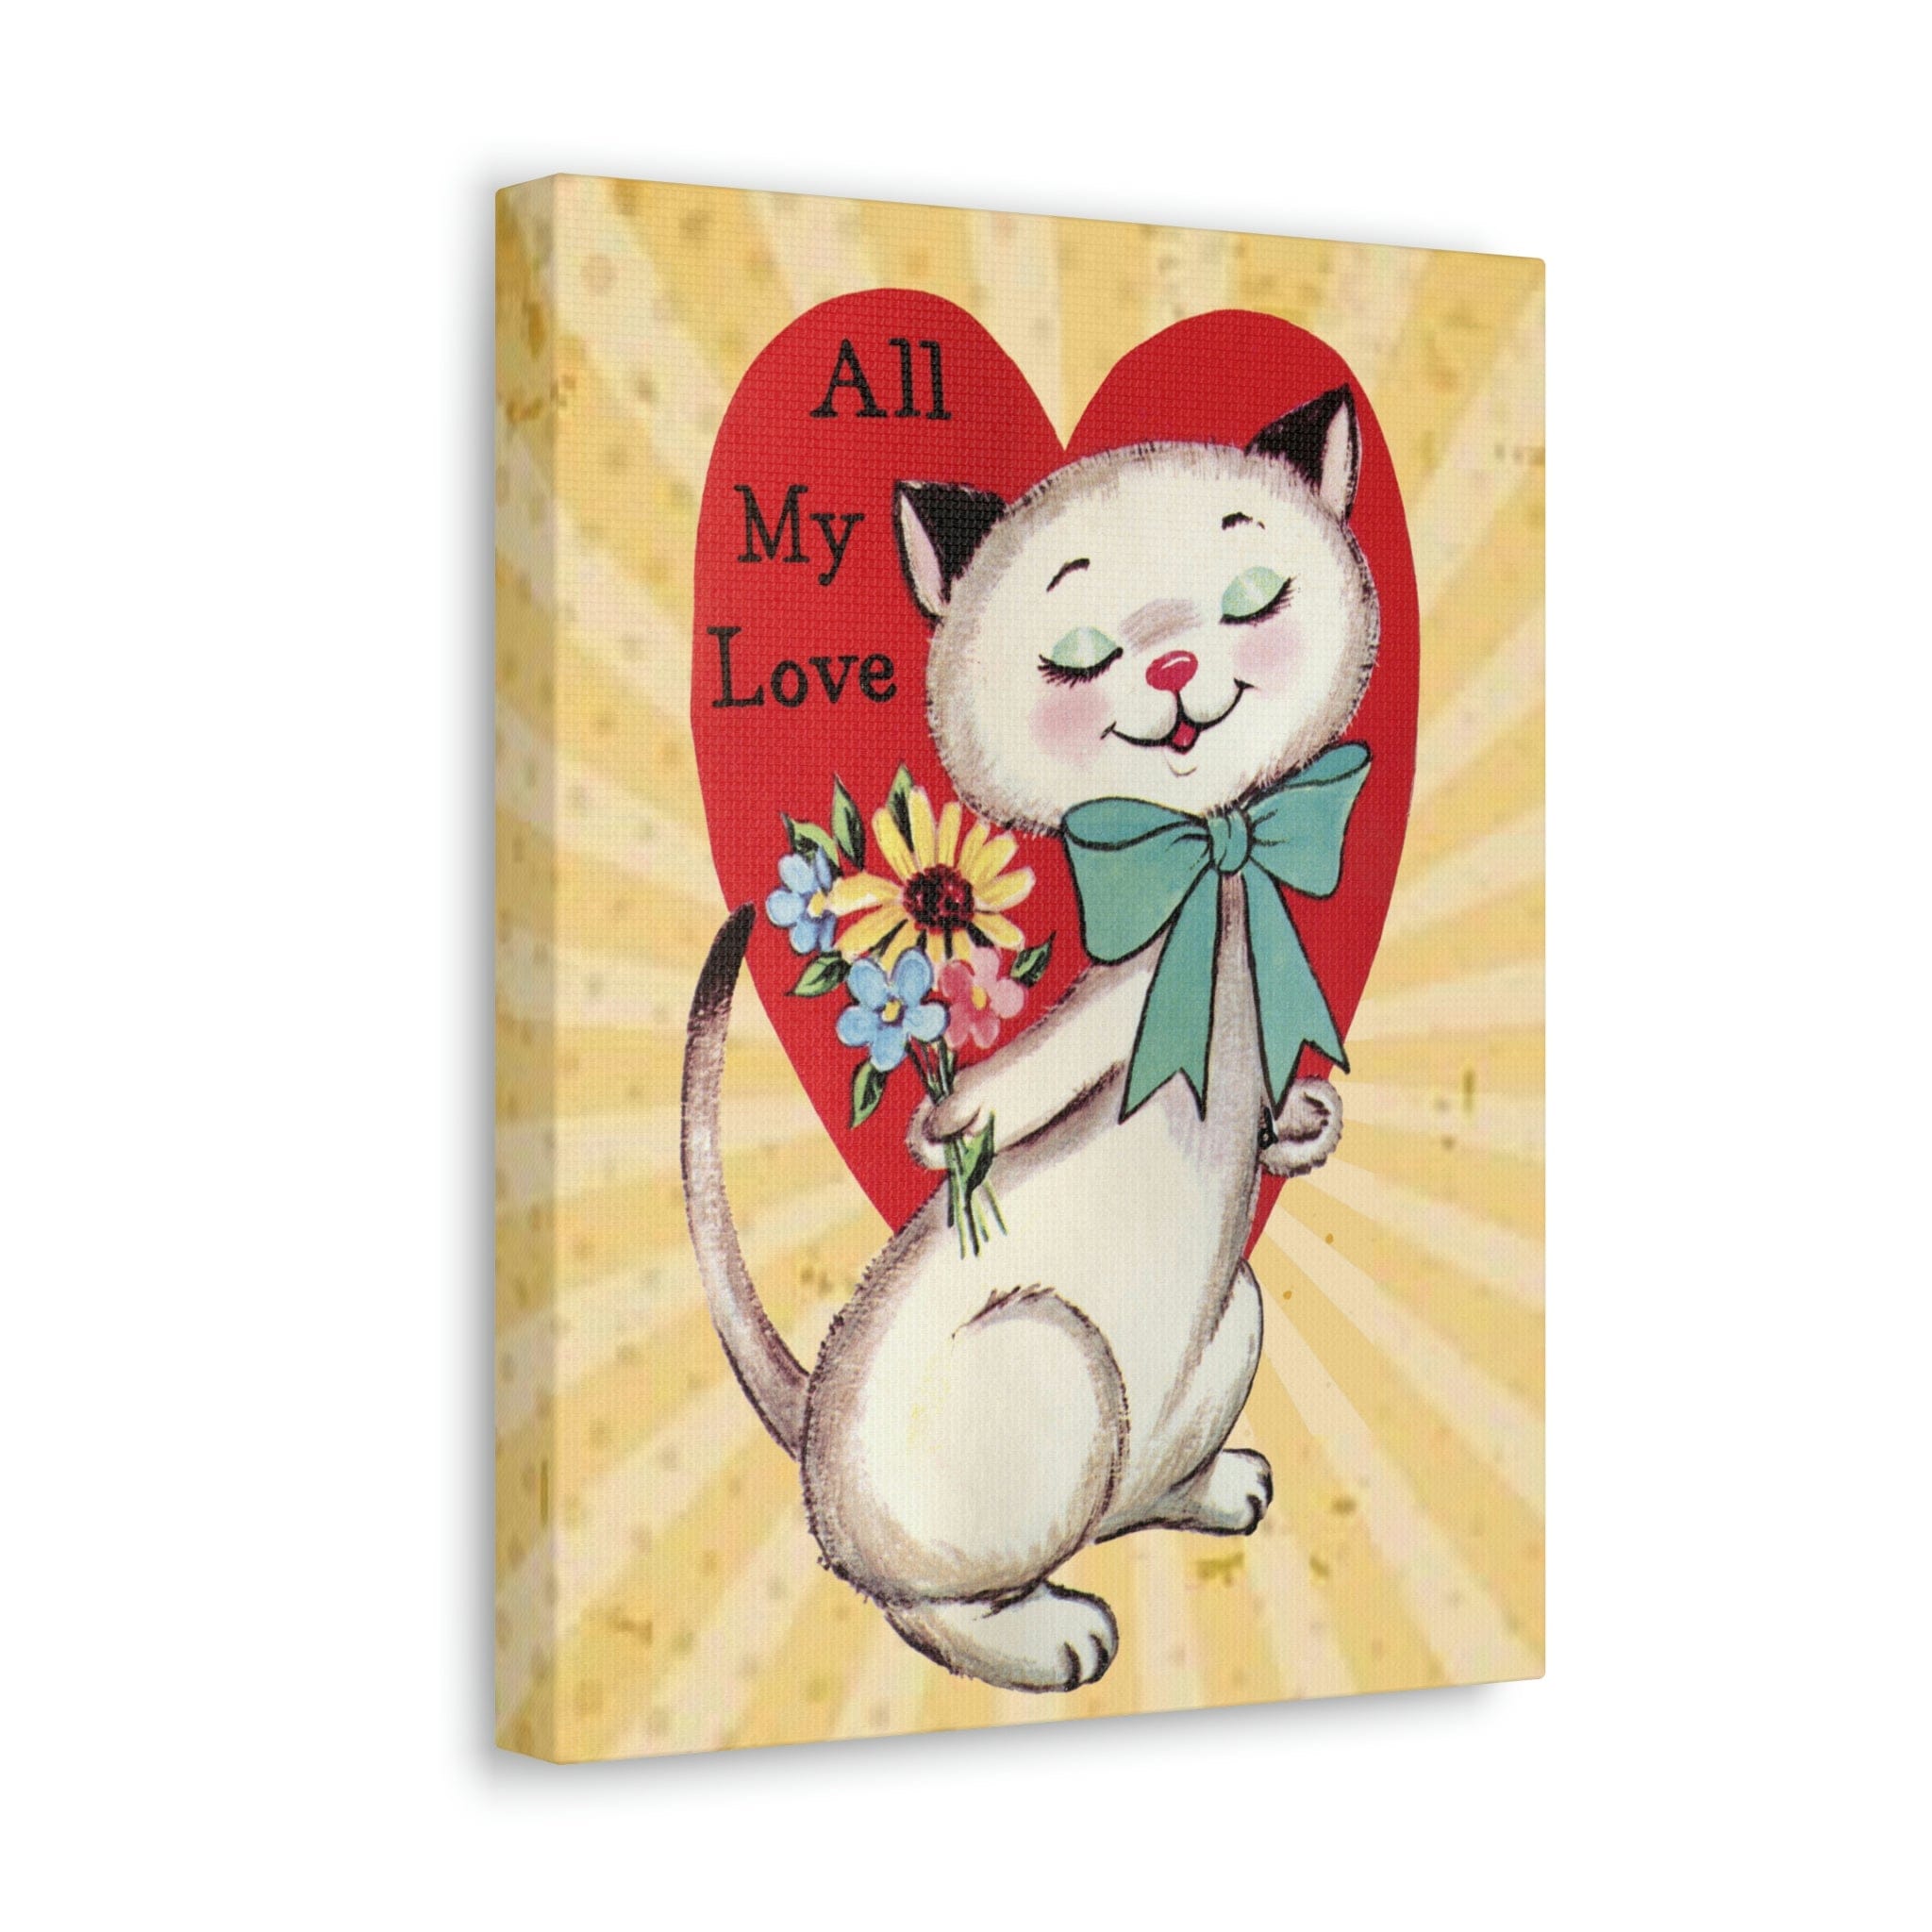 Vintage Retro Valentine Card, Cute White Kitschy Cat All My Love, Valentine  Gifts for Her